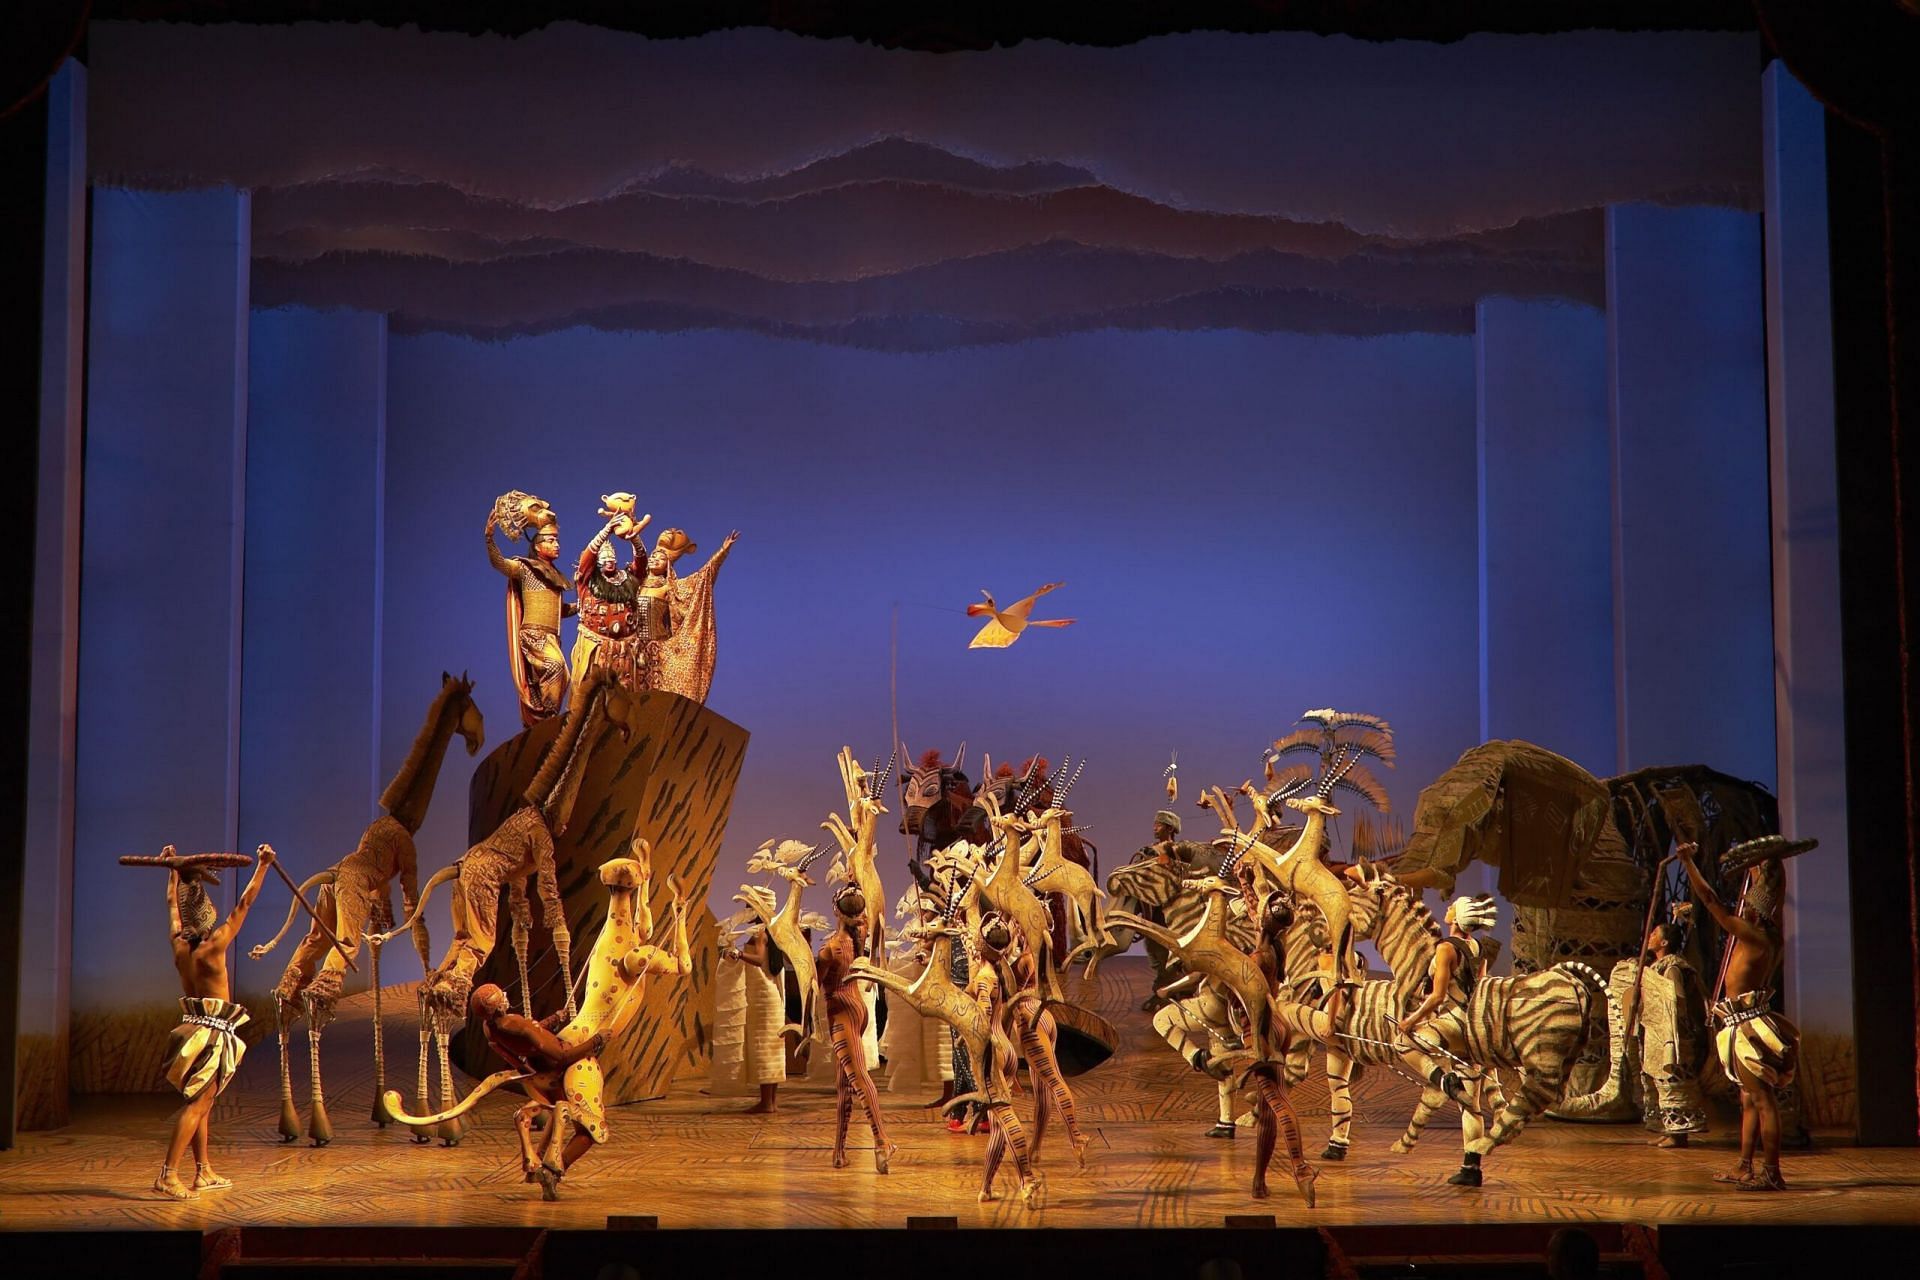 The cast of The Lion King musical performing The Circle of Life (Image via Brinkhoff-Moegenburg)